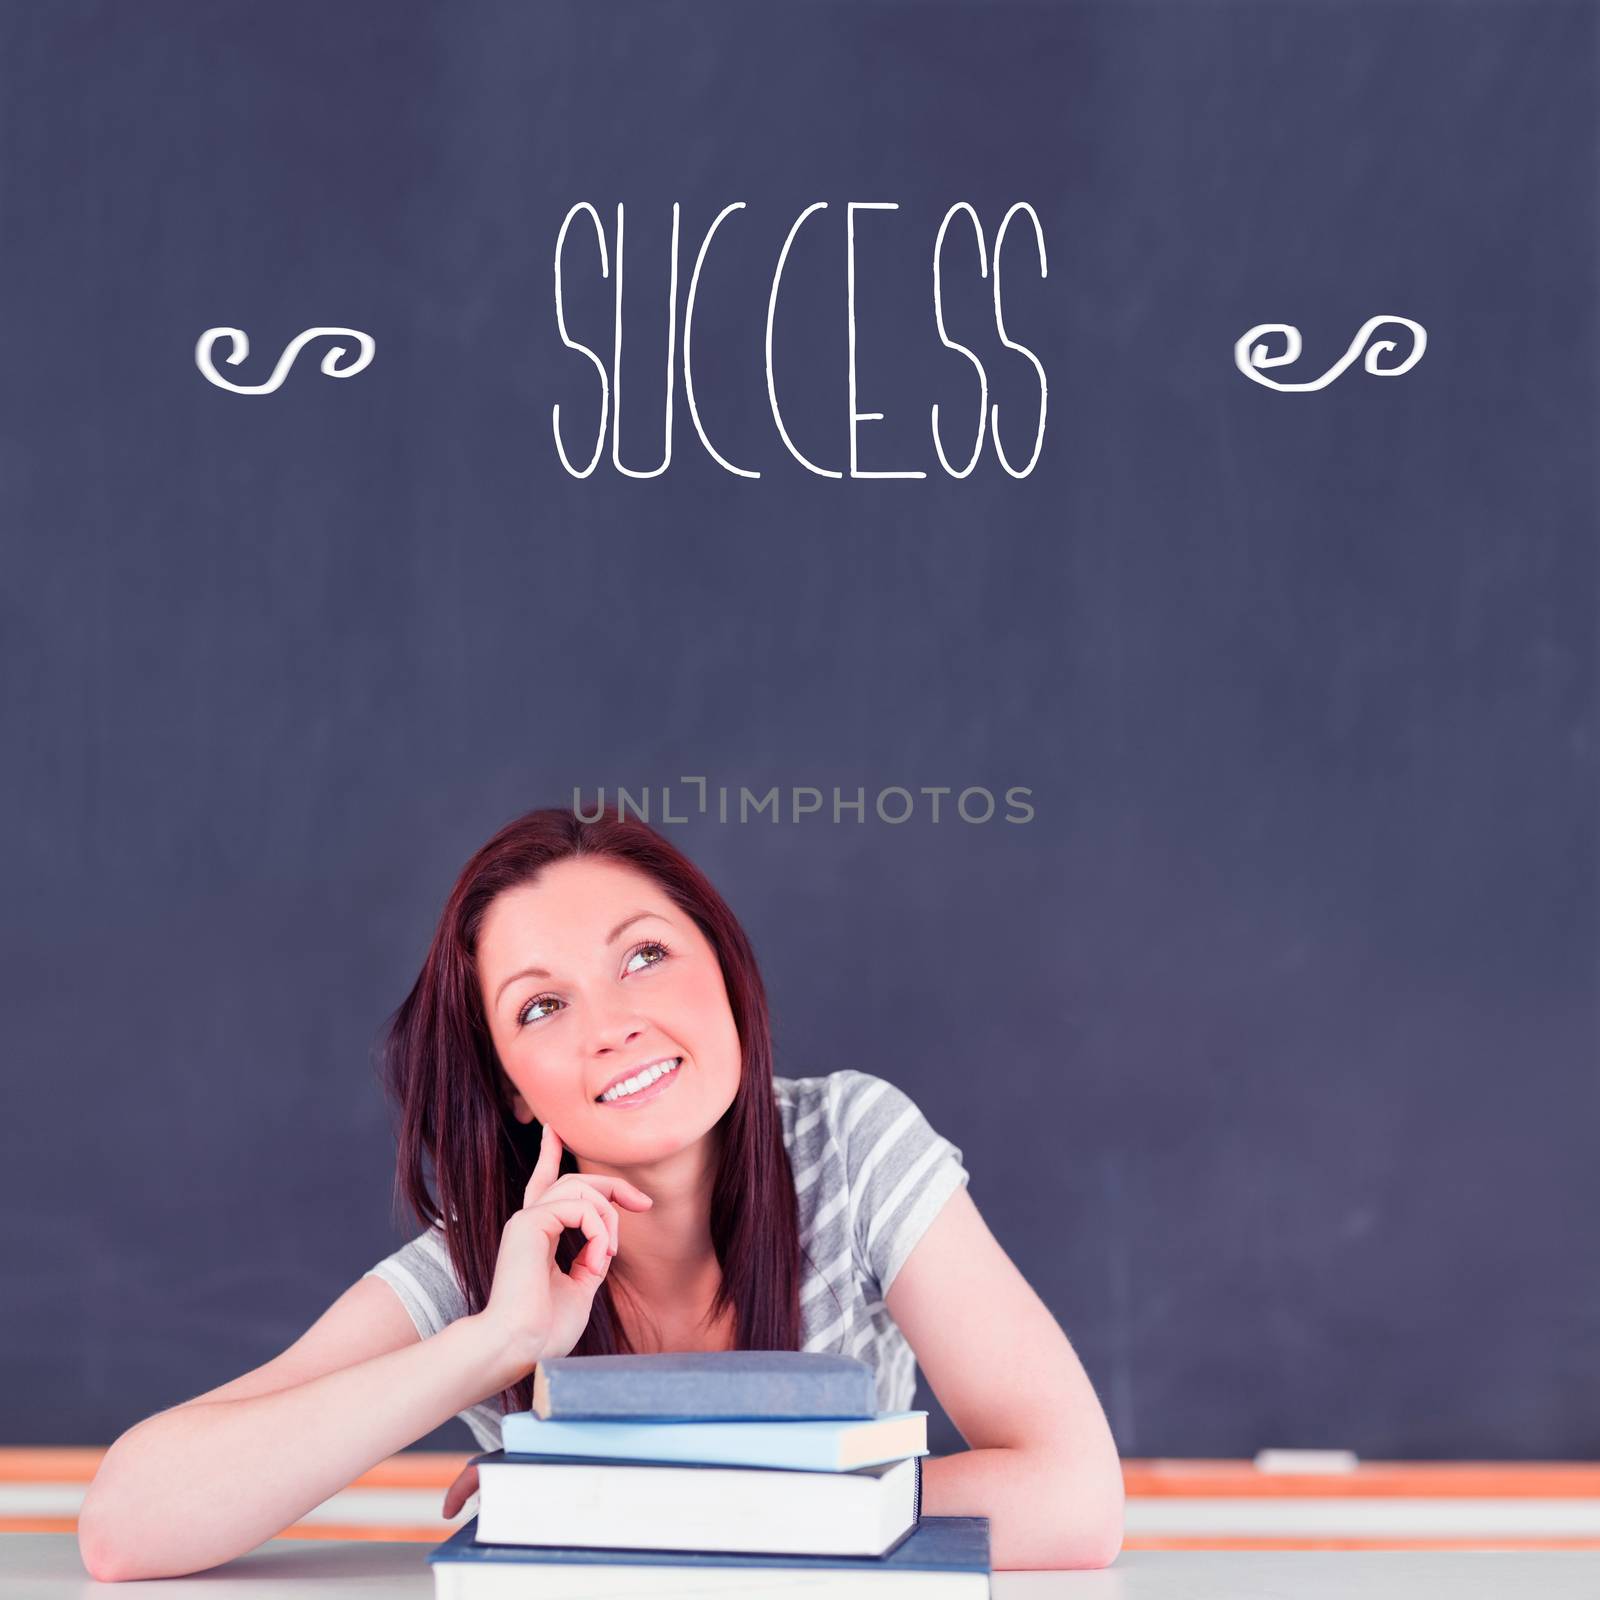 The word success against student thinking in classroom